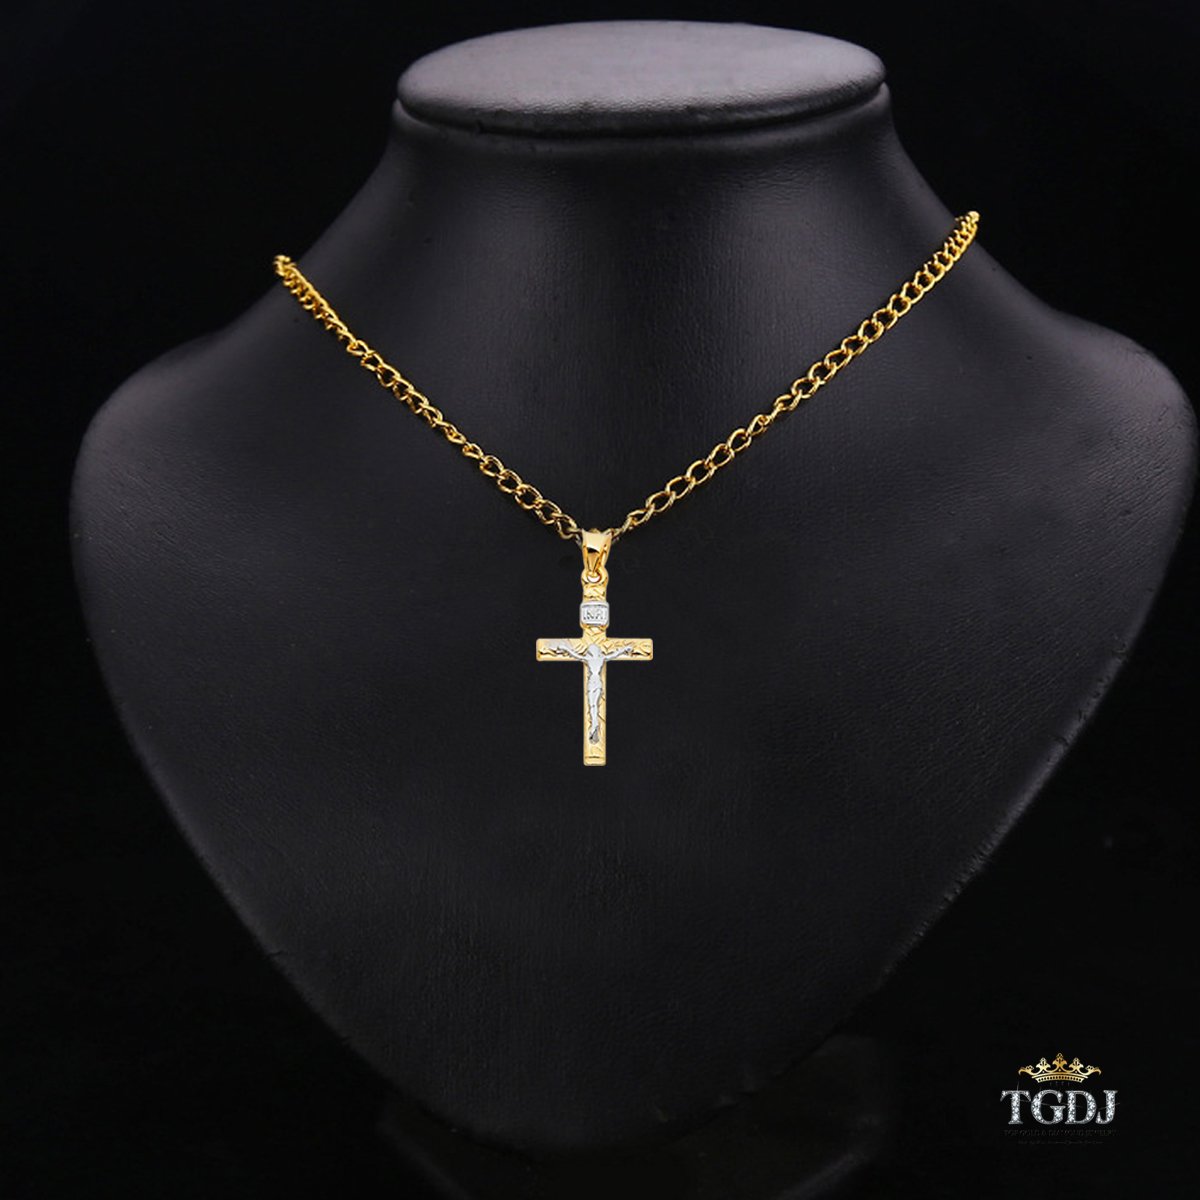 14K Two Tone Gold Crucifix Cross Religious Charm Pendant - 31x20 MM Real Gold Crucifix Charm Necklace Pendant - Great Gift for Men and Women